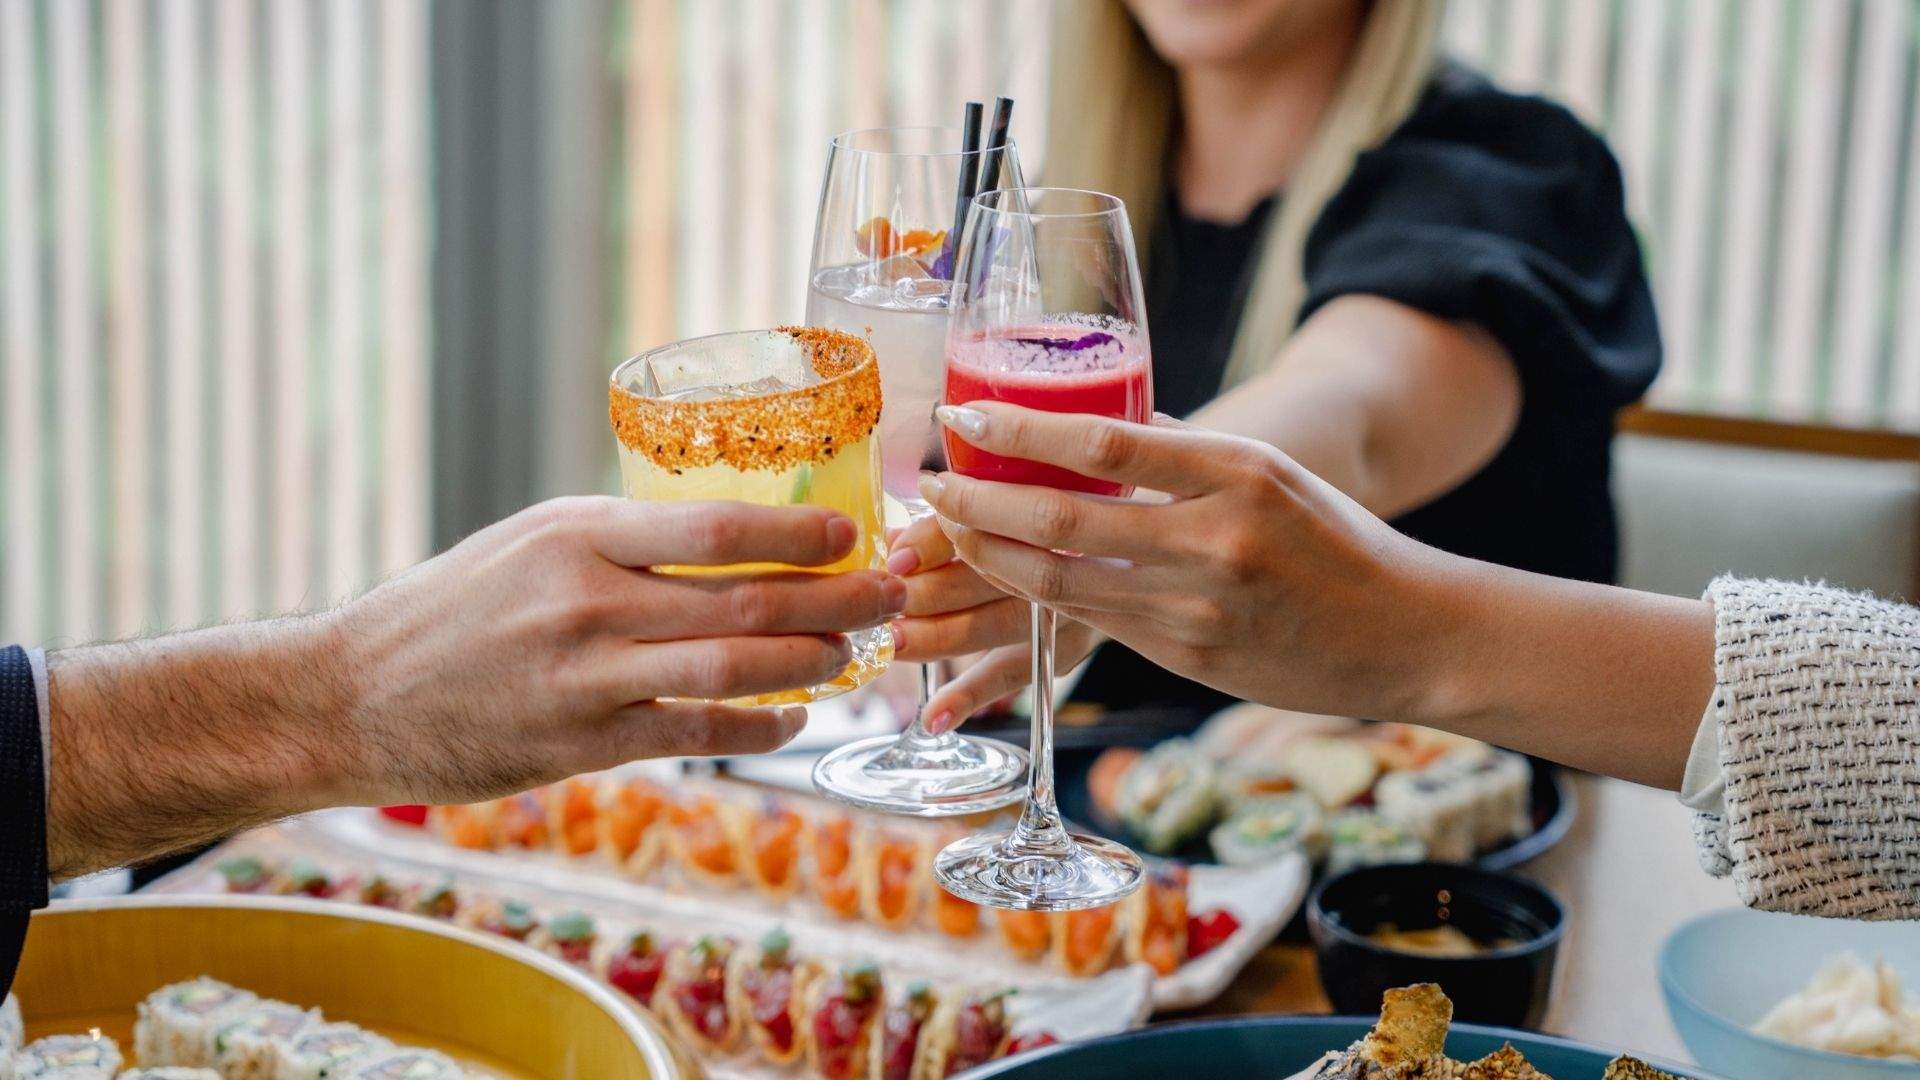 Sushi and drinks available for Nobu's all-you-can-eat lunch offering.